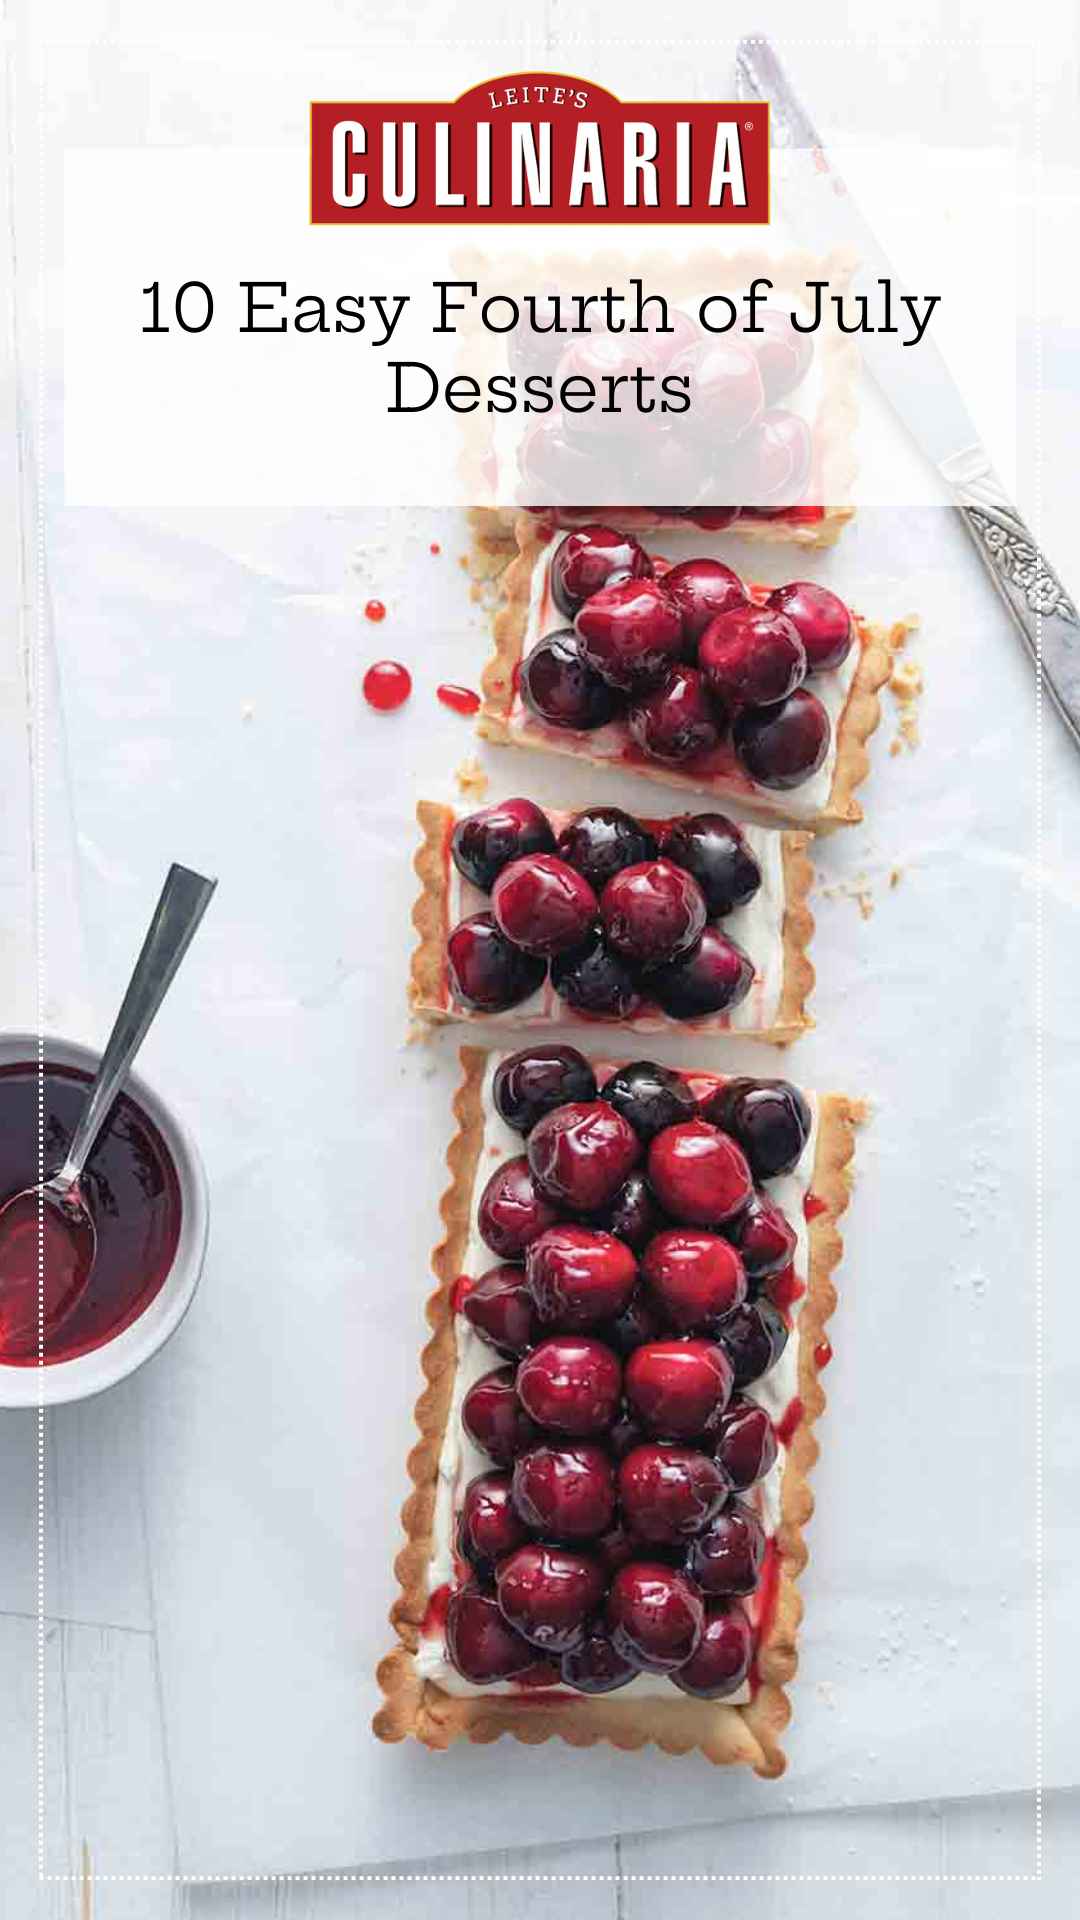 A fresh cherry tart cut into several pieces with a dish of cherry glaze on the side.